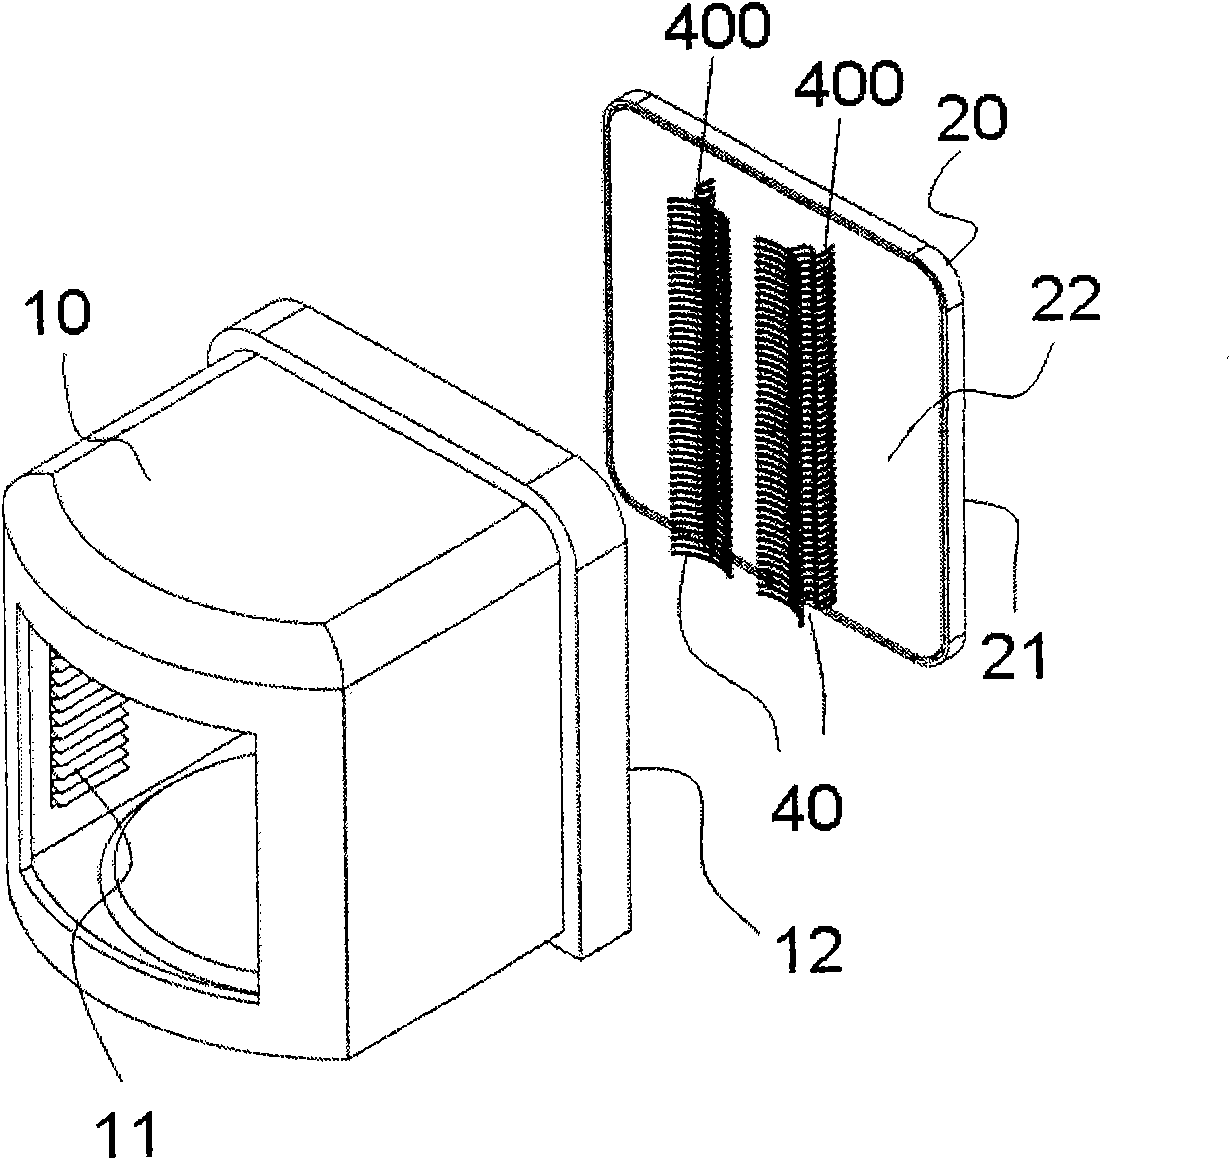 Front-opening unified pod with wafer constraints arranged on door